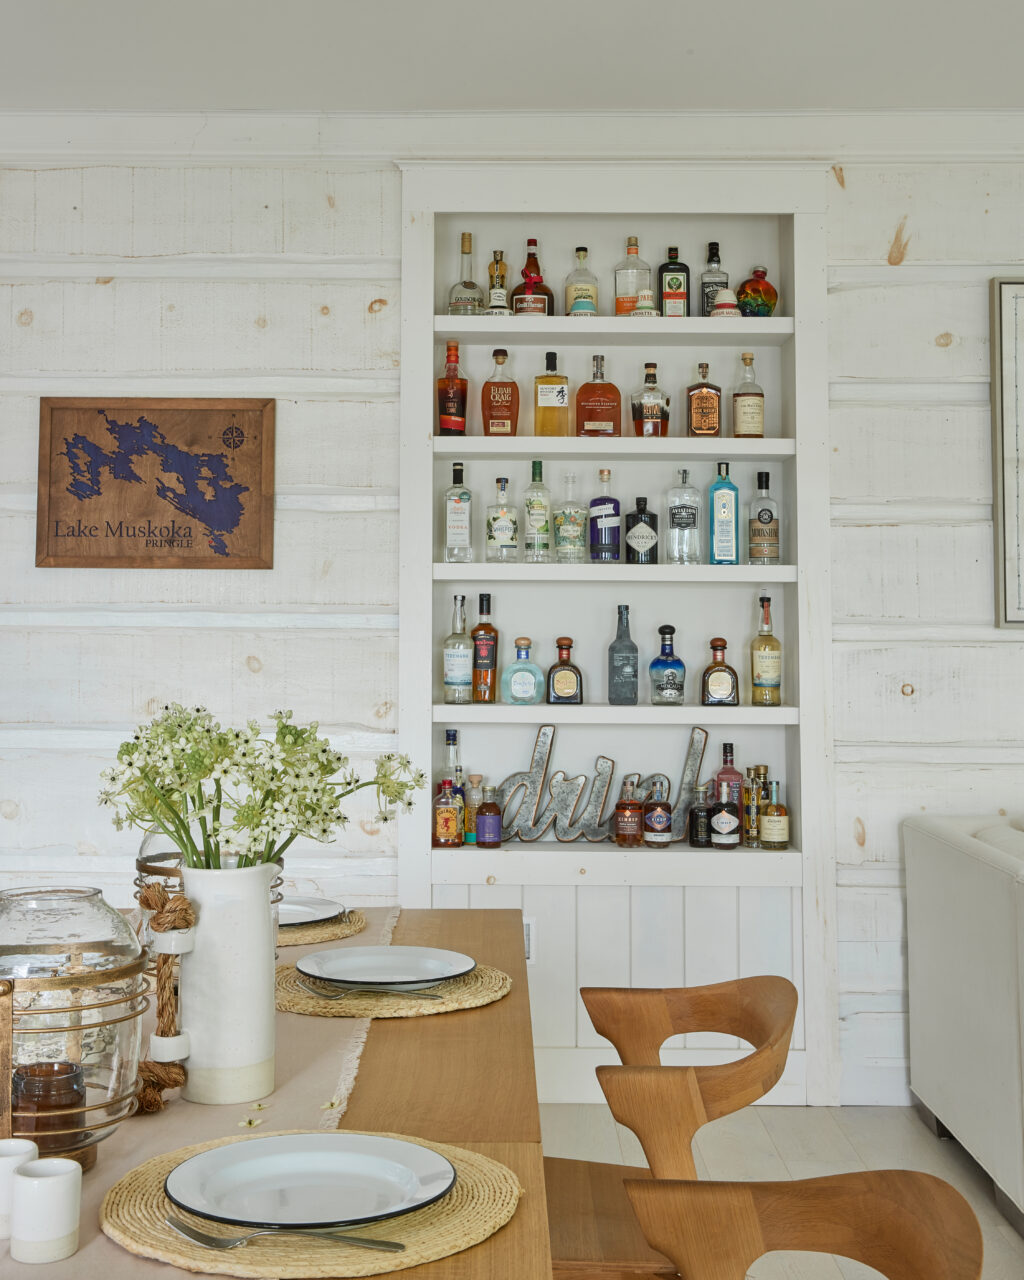 Wooden dining room table, set with beige placemats and white plates, in the back their is white shelving with a variety of alcohol bottles